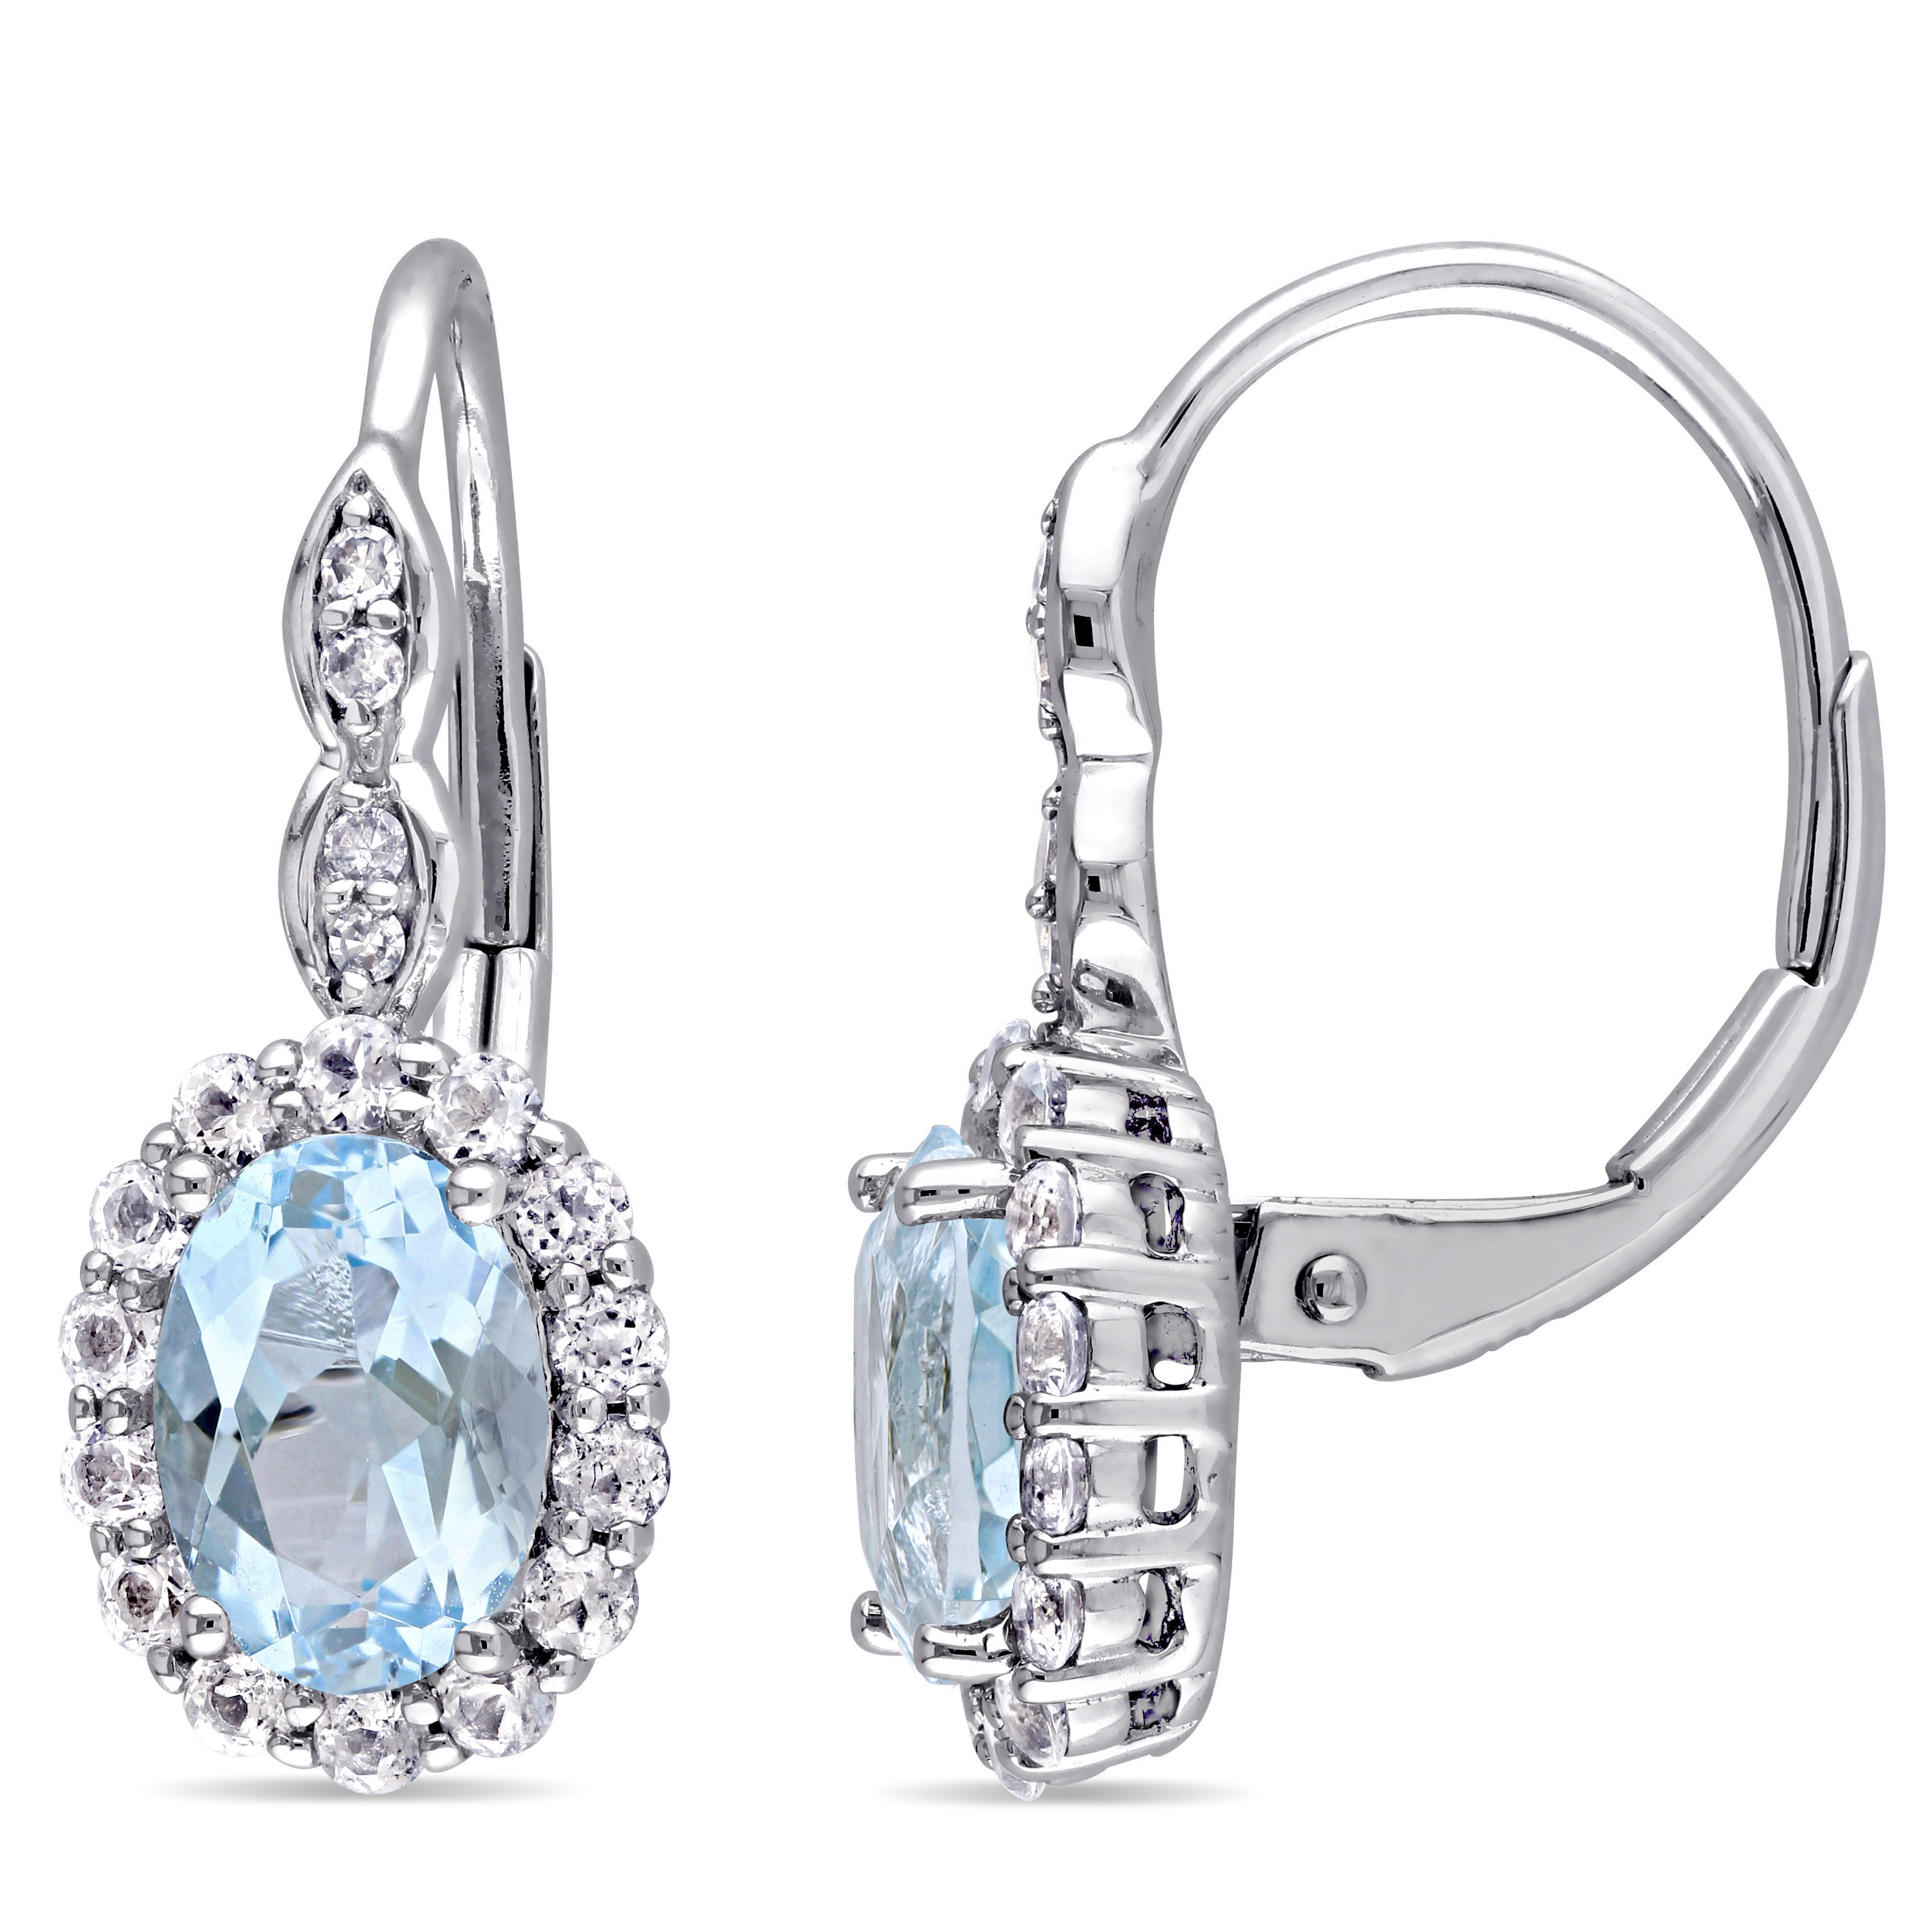 2 3/4 CT TGW Oval Shape Blue Topaz, White Topaz and Diamond Accent Vintage LeverBack Earrings in 14k White Gold